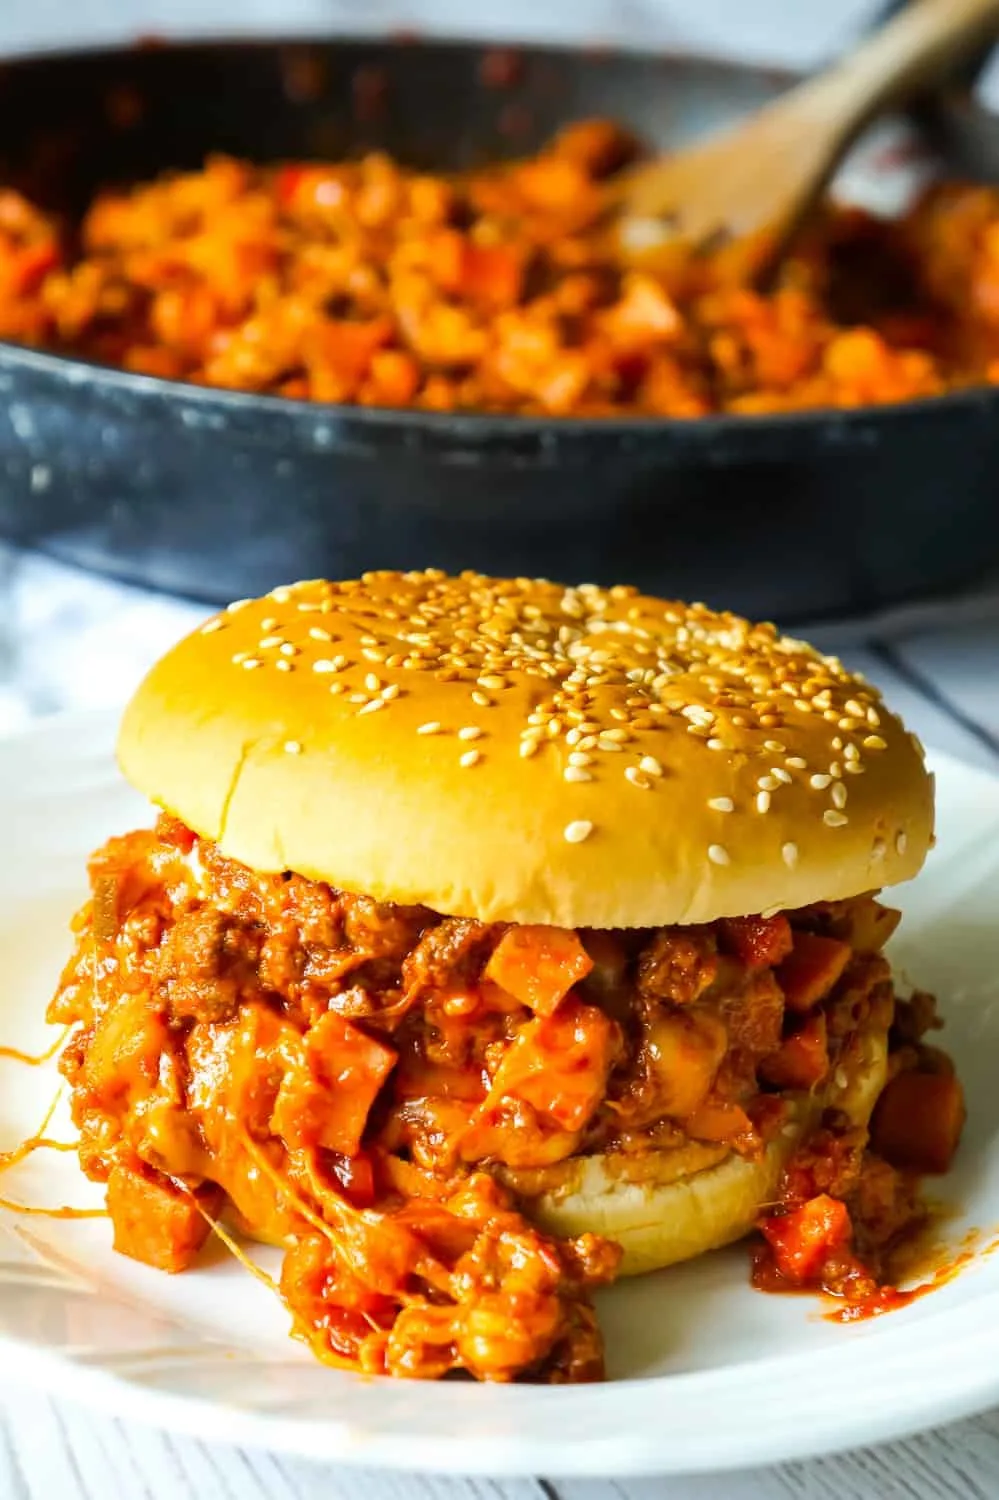 Chili Cheese Dog Sloppy Joes are an easy ground beef dinner recipe perfect for weeknights. These homemade sloppy joes are loaded with chopped wieners, shredded cheese, and onions all tossed in a chili sauce with a bit of a kick.